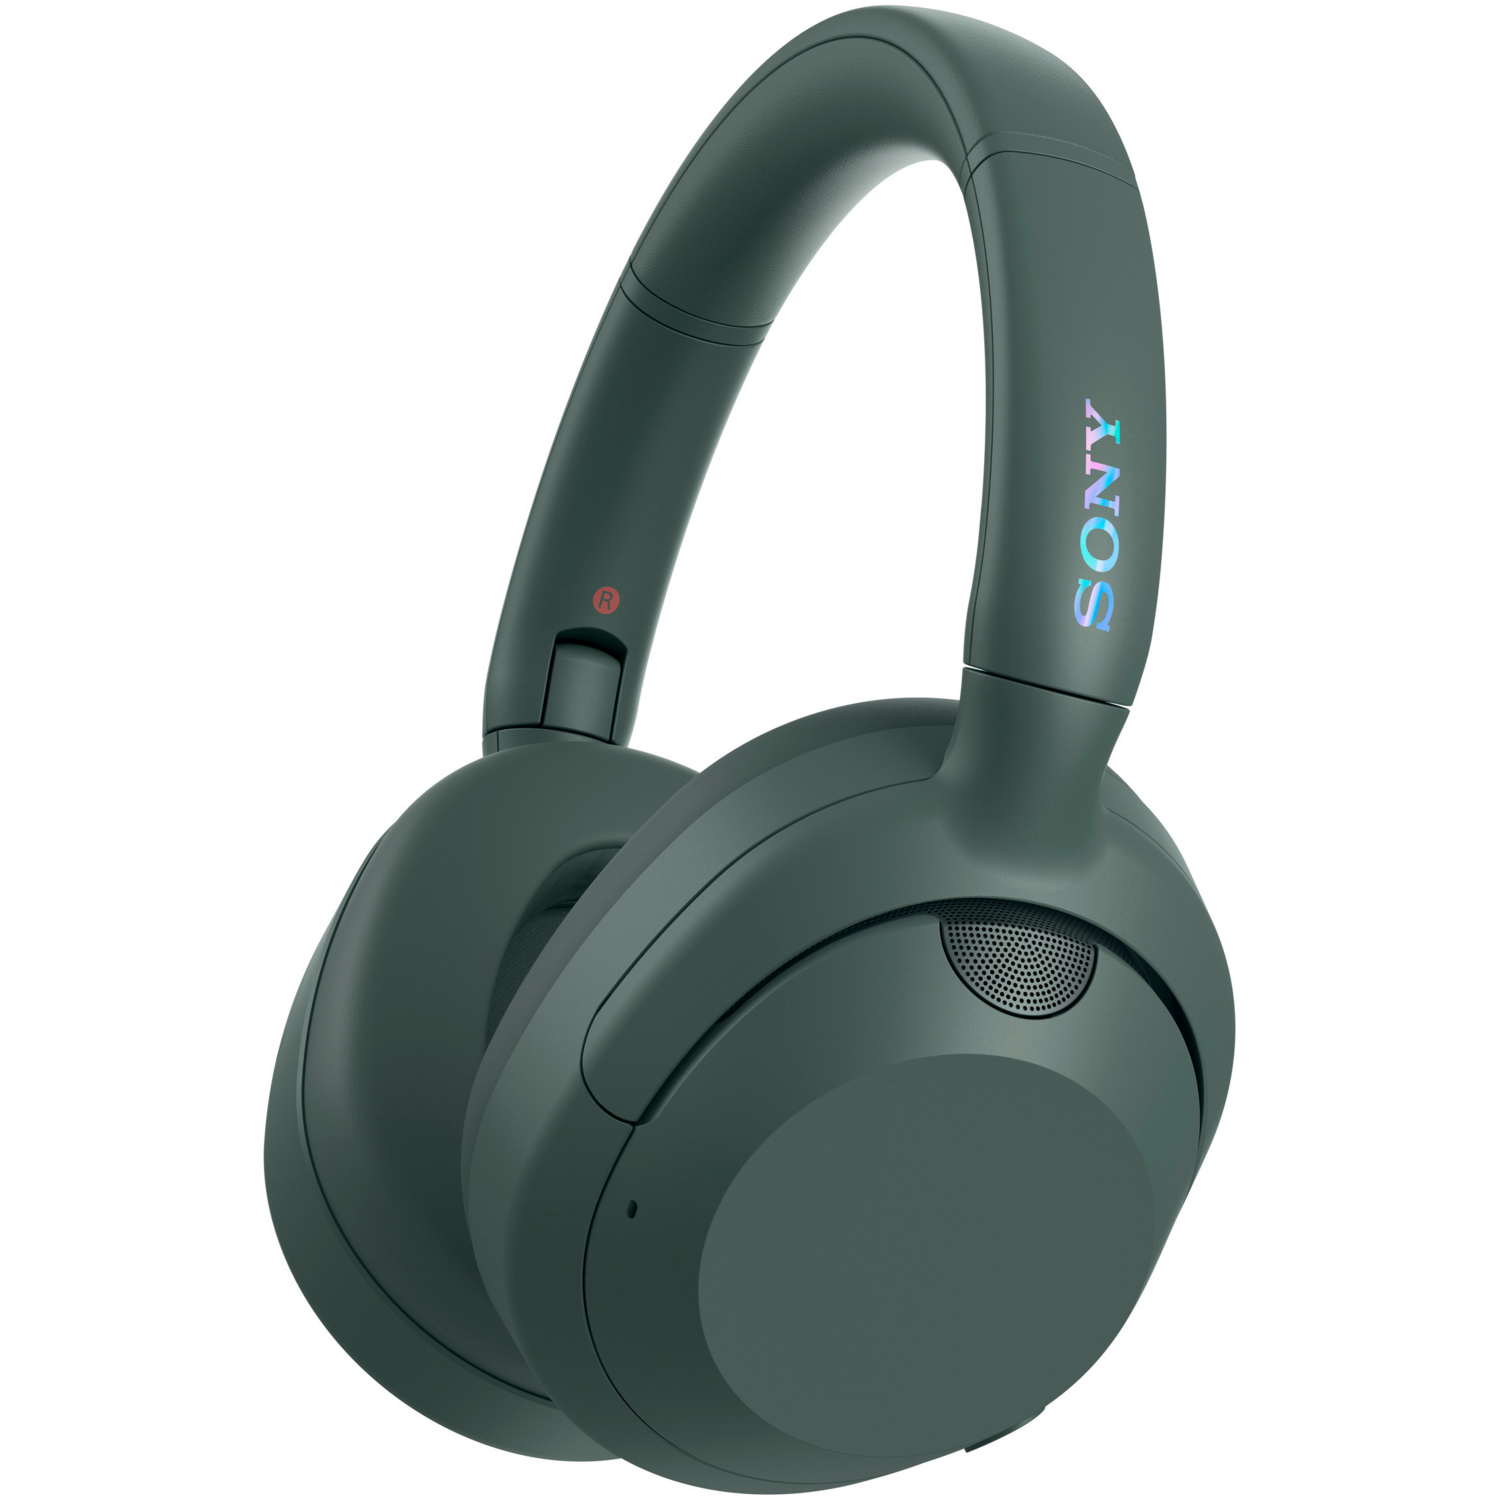 Навушники Bluetooth Sony Over-ear ULT WEAR Forest Gray (WHULT900NH.CE7)фото